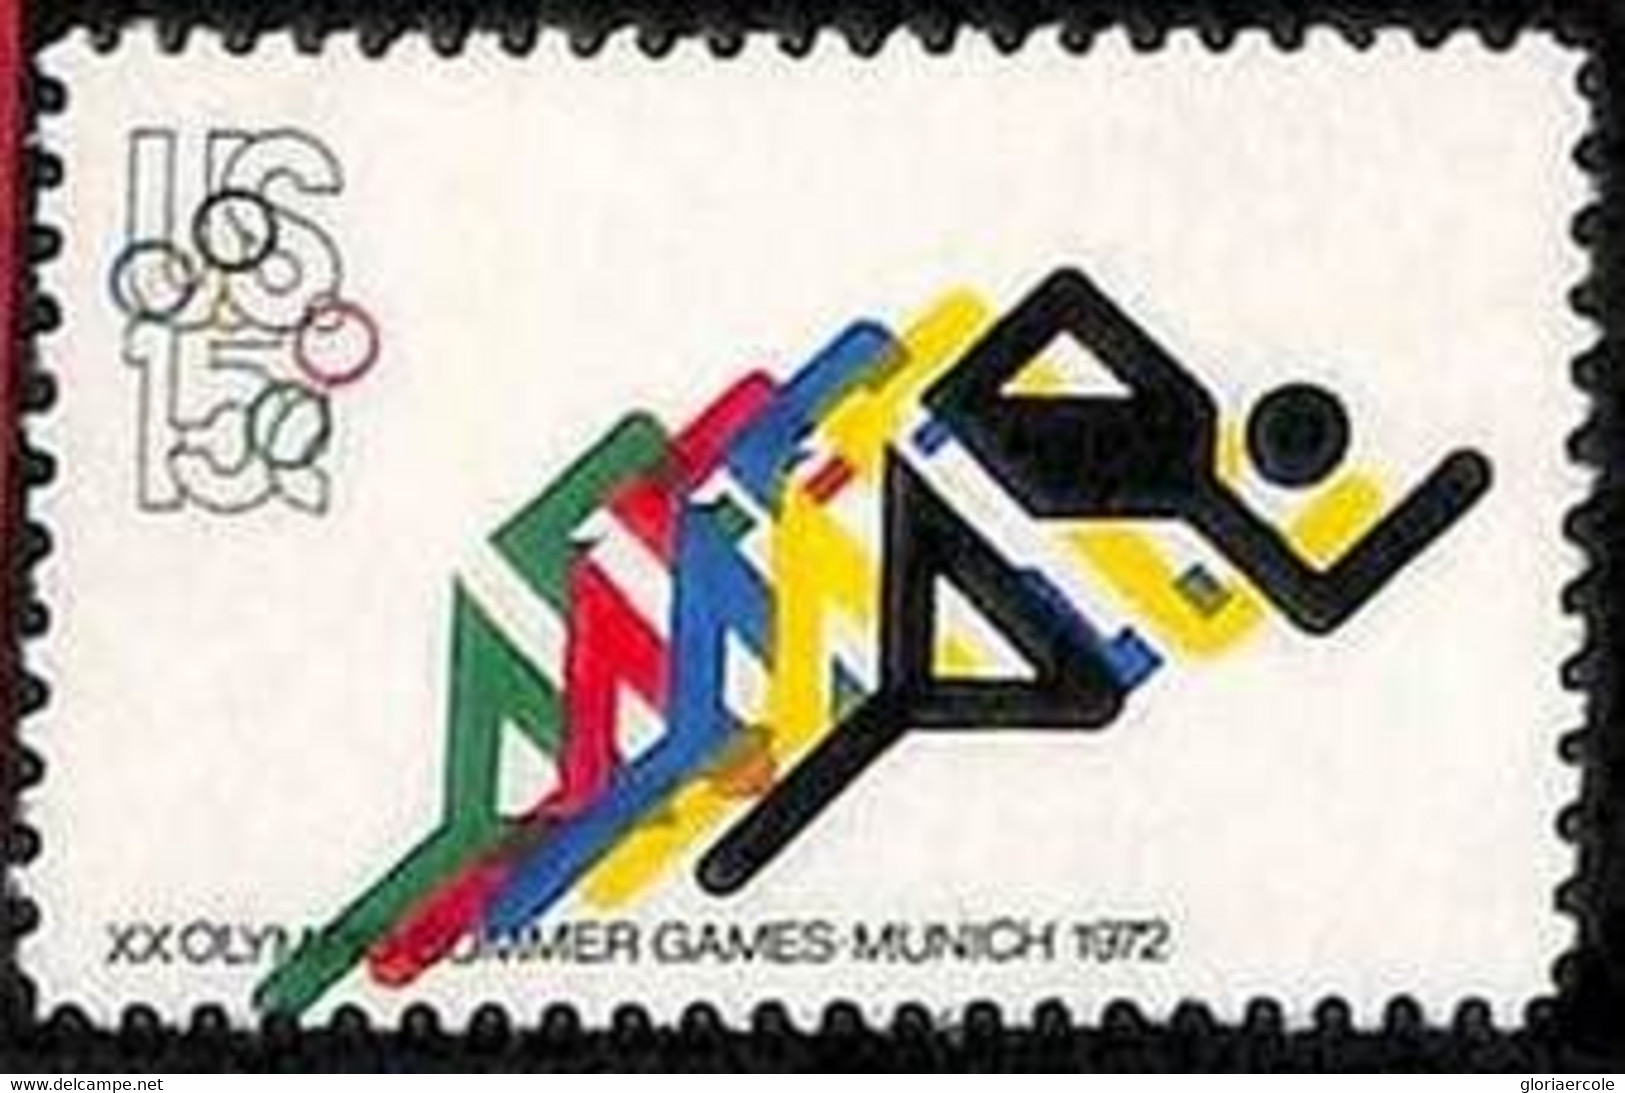 94809d - USA - STAMPS - Sc # 1462 Olympic Games -  SHIFTED PRINT - MNH - Errors, Freaks & Oddities (EFOs)